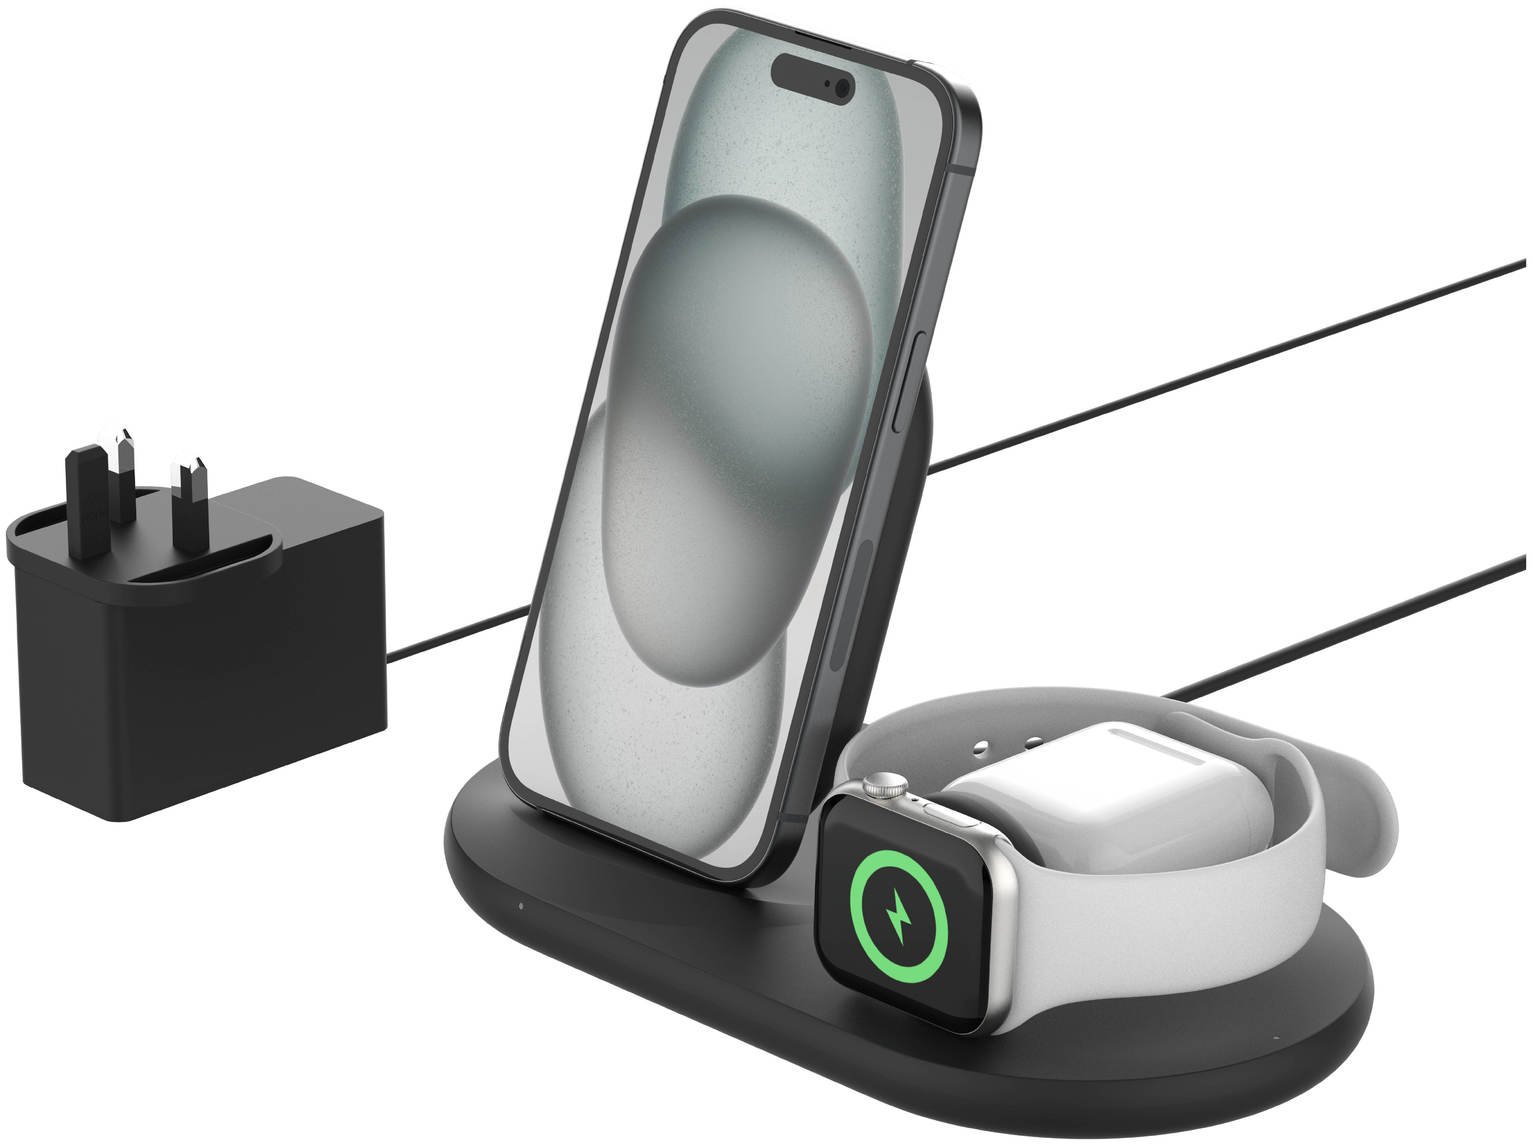 Belkin 3 in 1 Wireless Charger Stand Including Plug Review